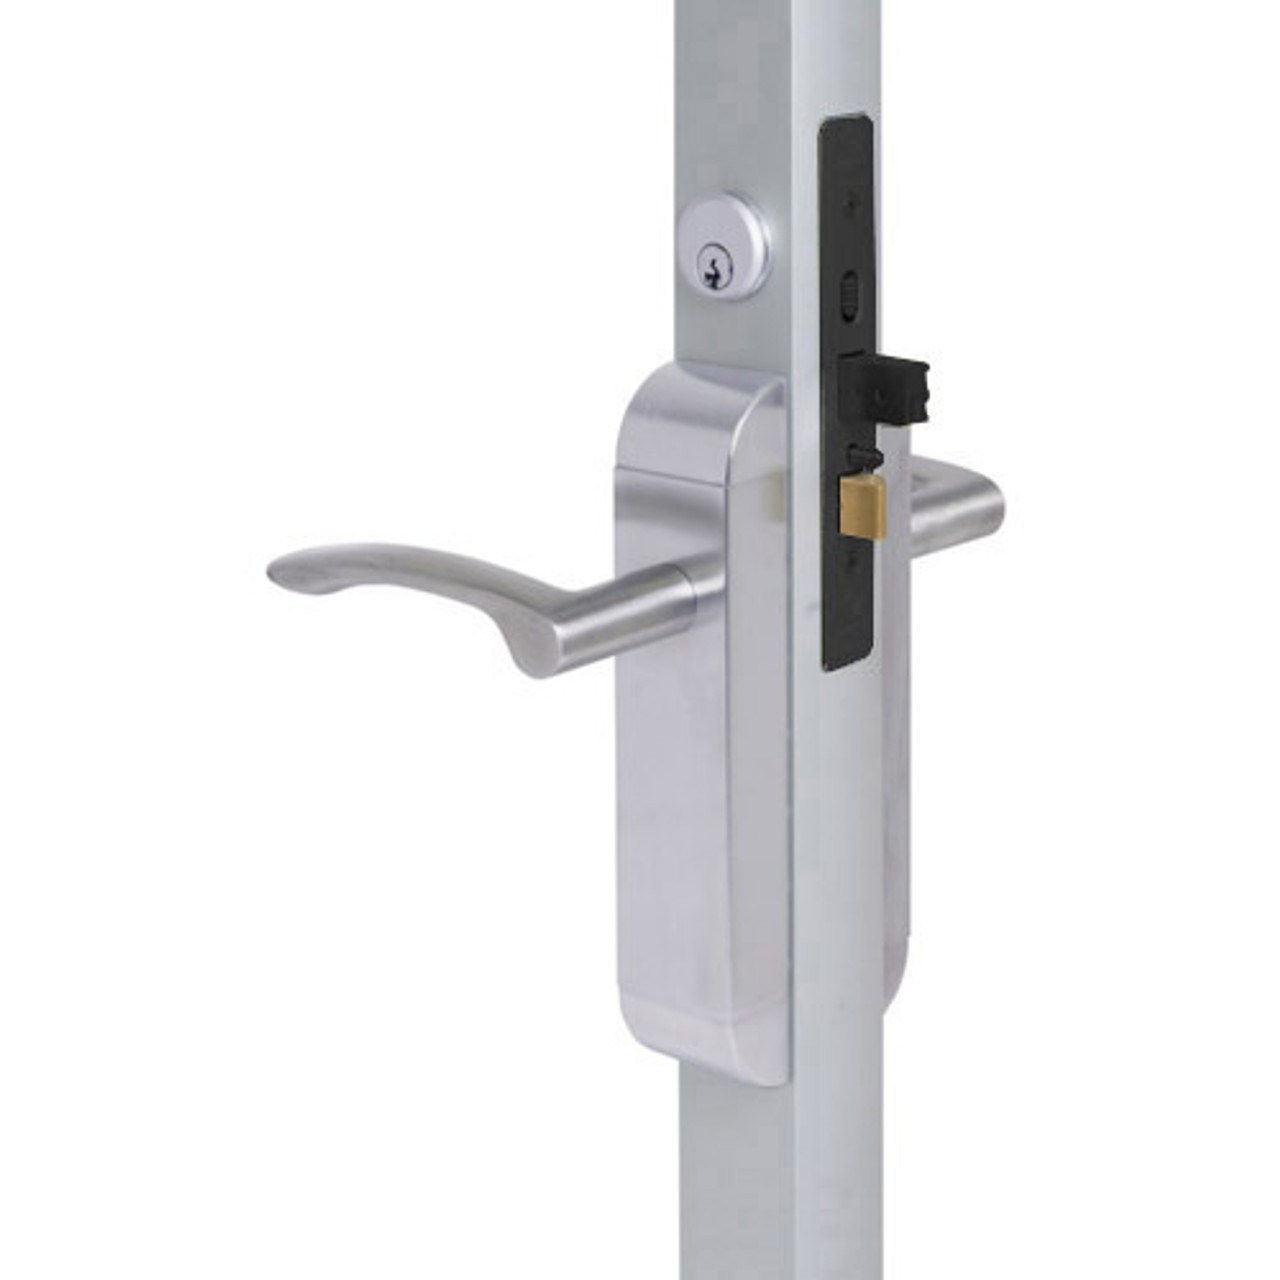 2190-343-203-32 Adams Rite Dual Force Interconnected 2190 series Deadlock/Deadlatch in Bright Stainless